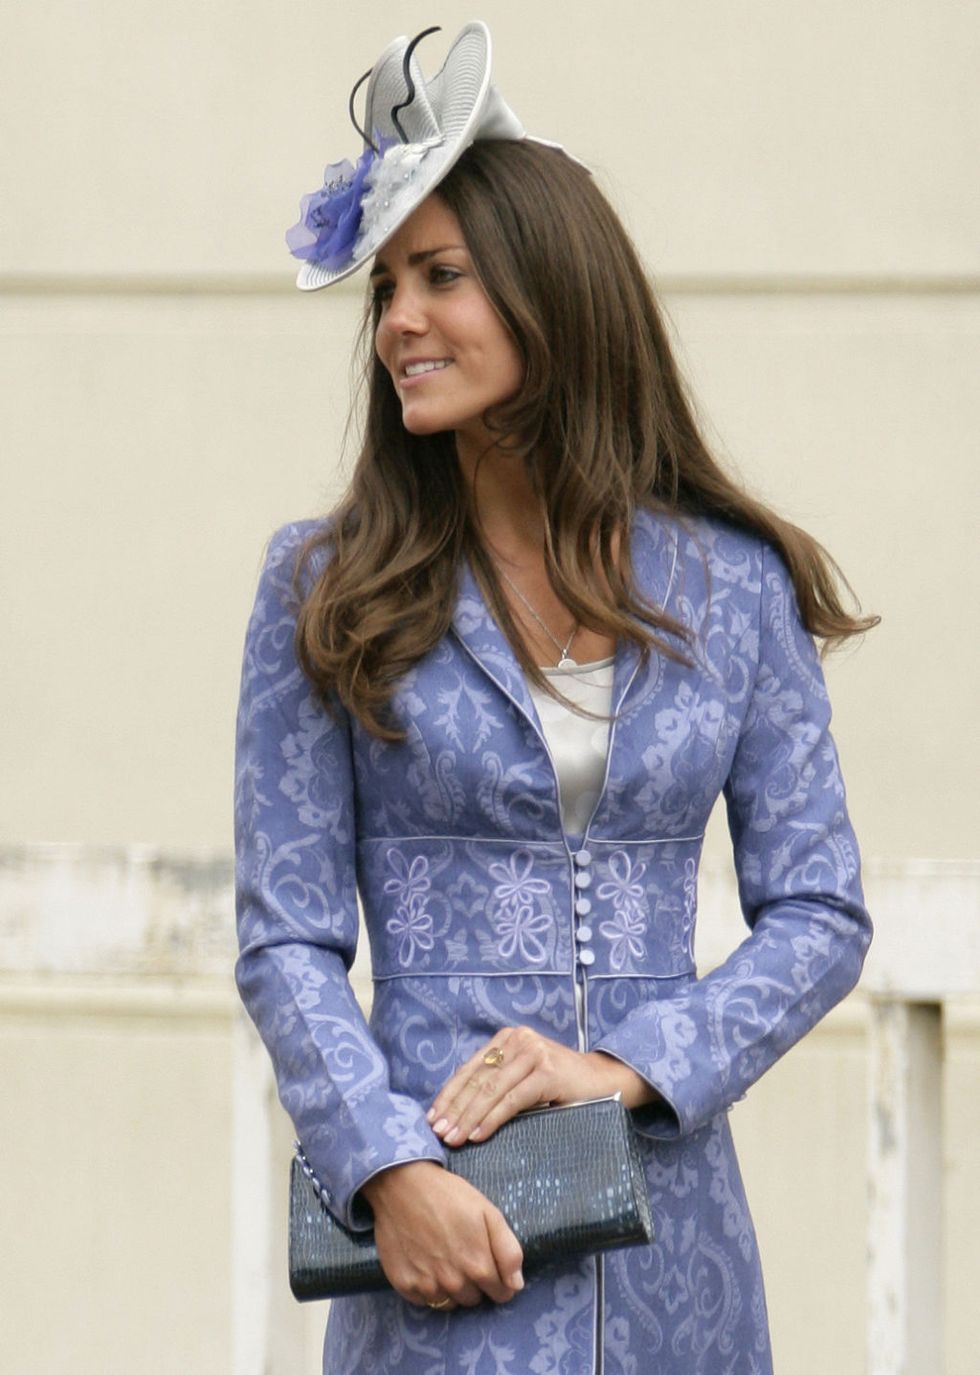 Kate Middleton Best Hairstyles - blue and white fascinator